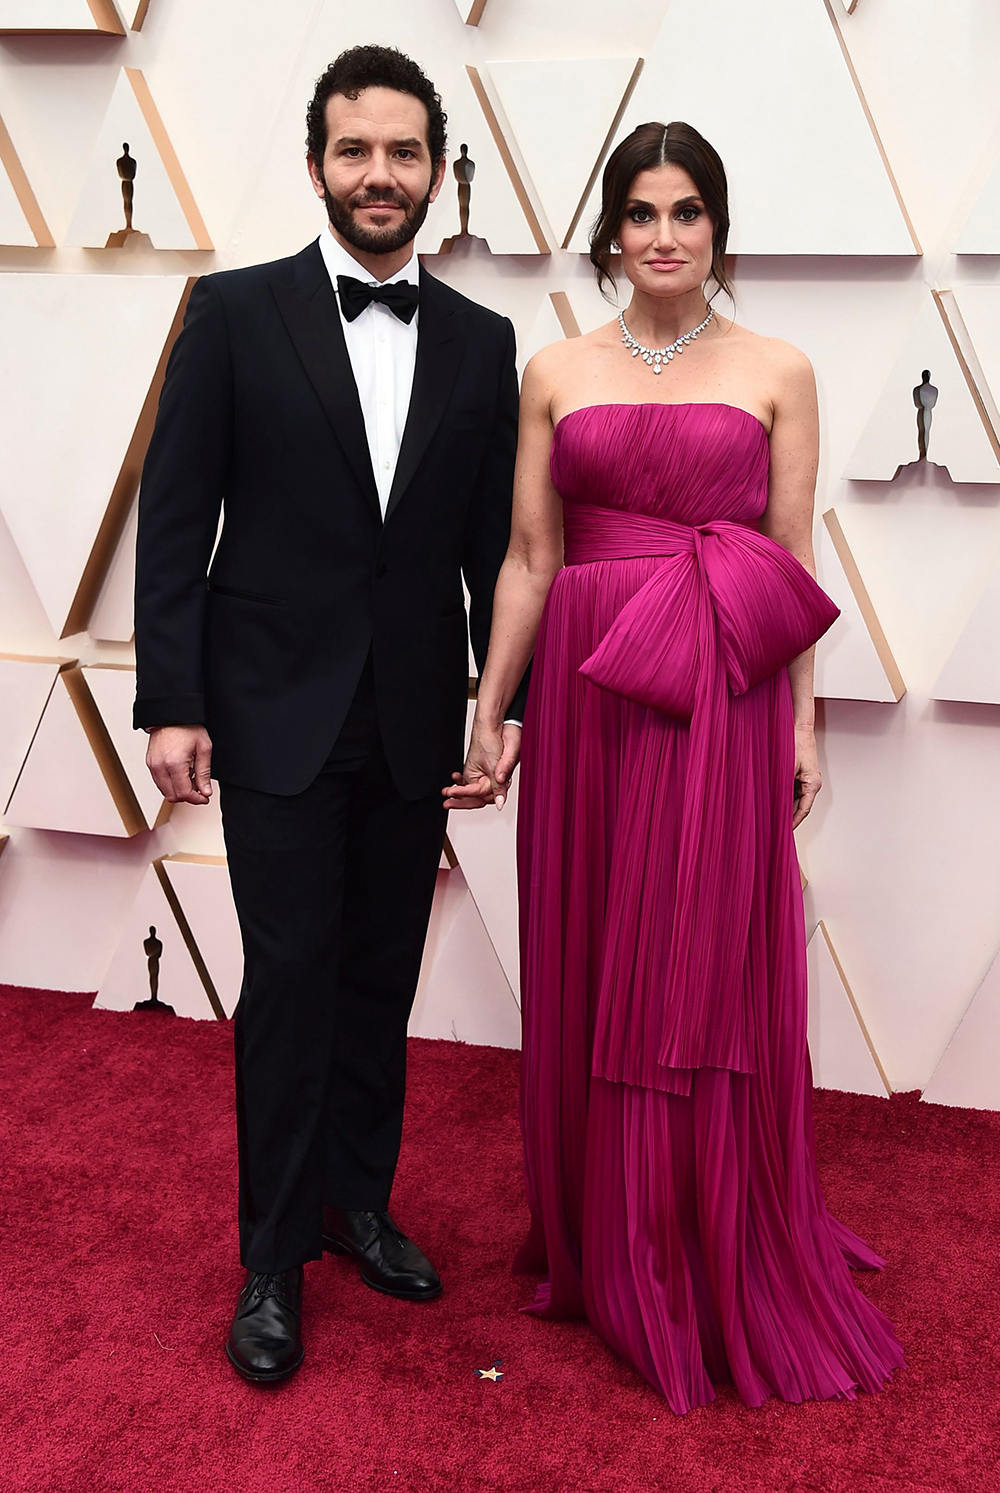 Aaron Lohr, Idina Menzel. Aaron Lohr, left, and Idina Menzel arrive at the Oscars, at the Dolby Theatre in Los Angeles
92nd Academy Awards - Arrivals, Los Angeles, USA - 09 Feb 2020